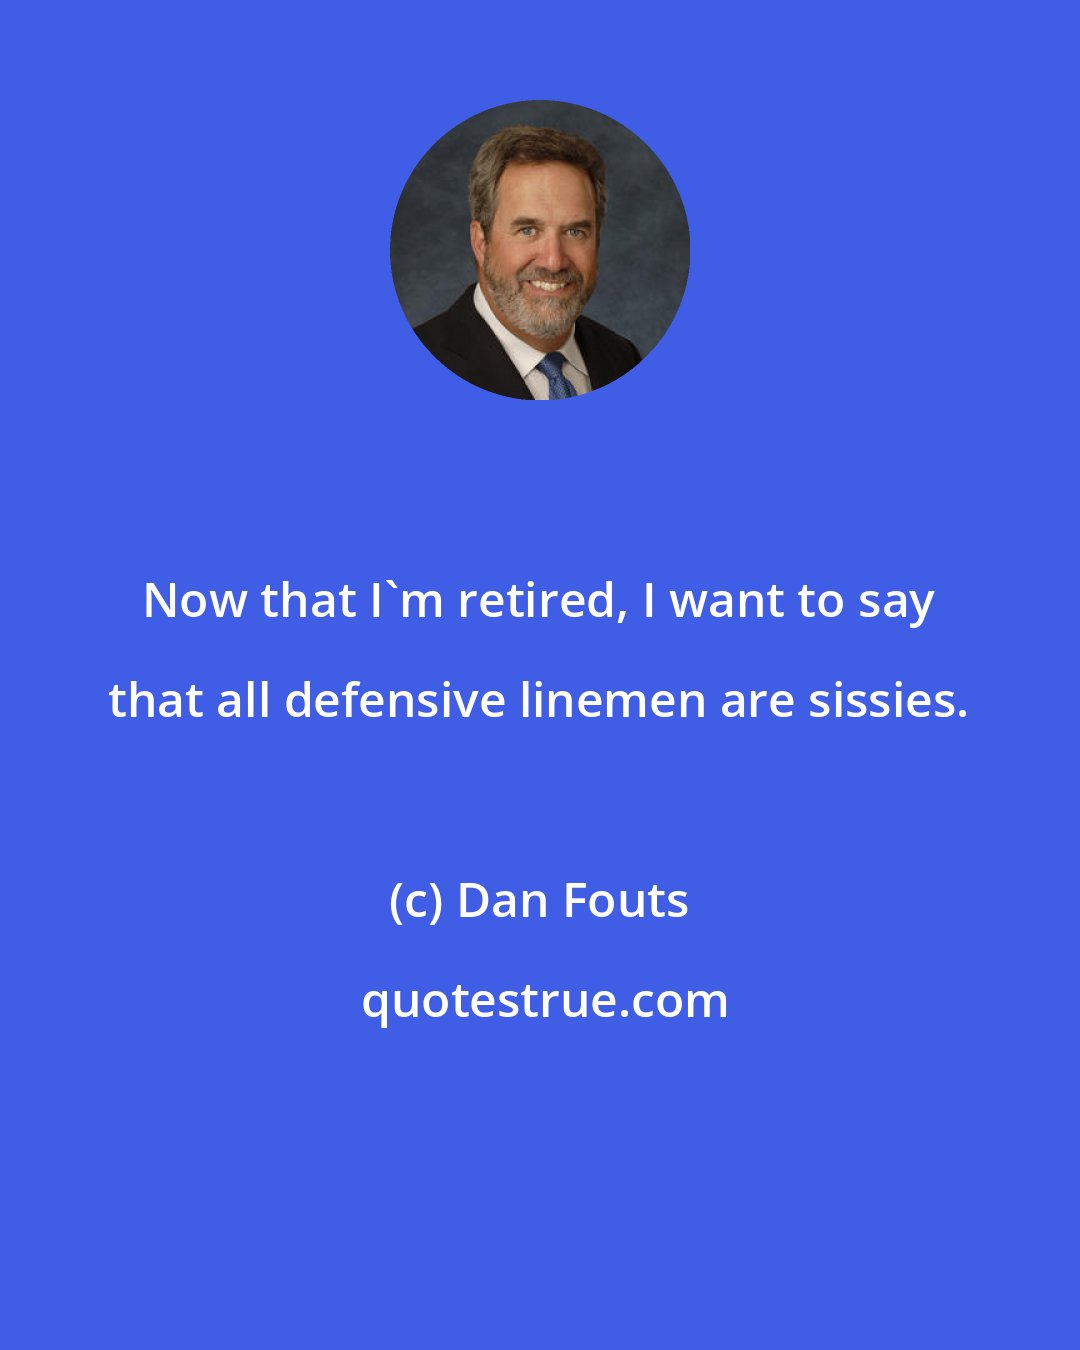 Dan Fouts: Now that I'm retired, I want to say that all defensive linemen are sissies.